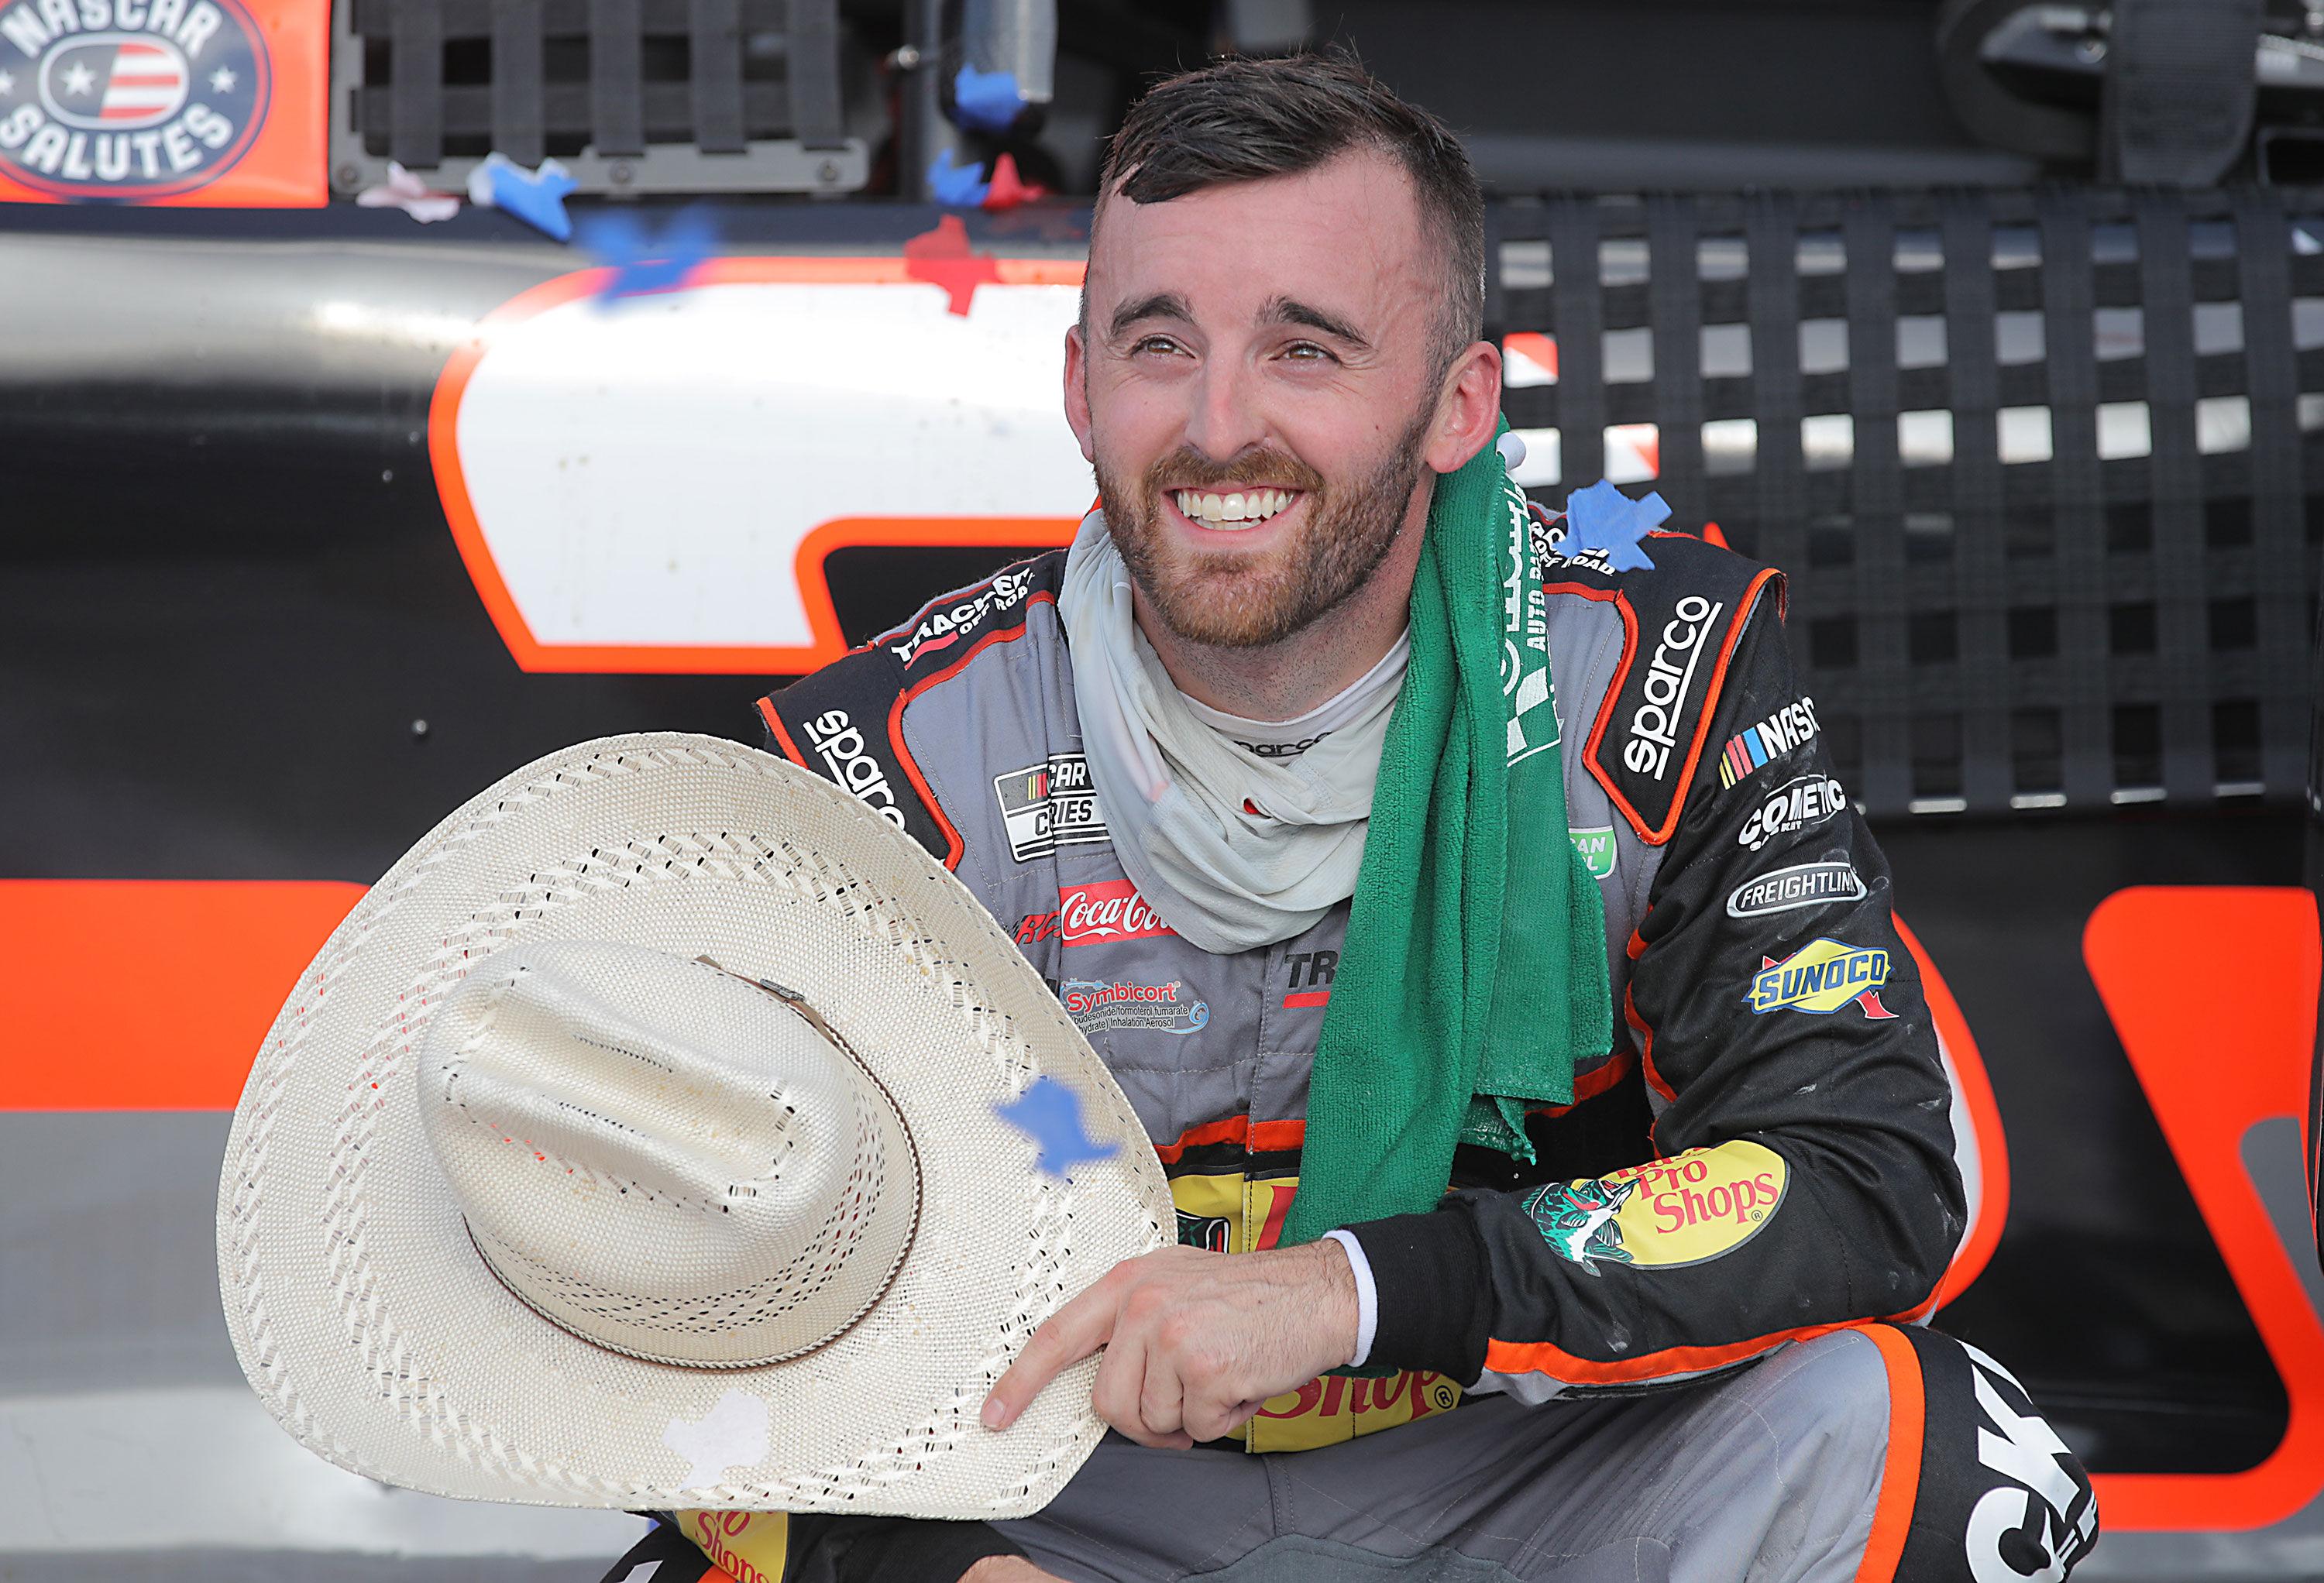 Austin Dillon celebrates after winning the NASCAR Cup Series O'Reilly Auto Parts 500 on July 19 in Fort Worth, Texas.